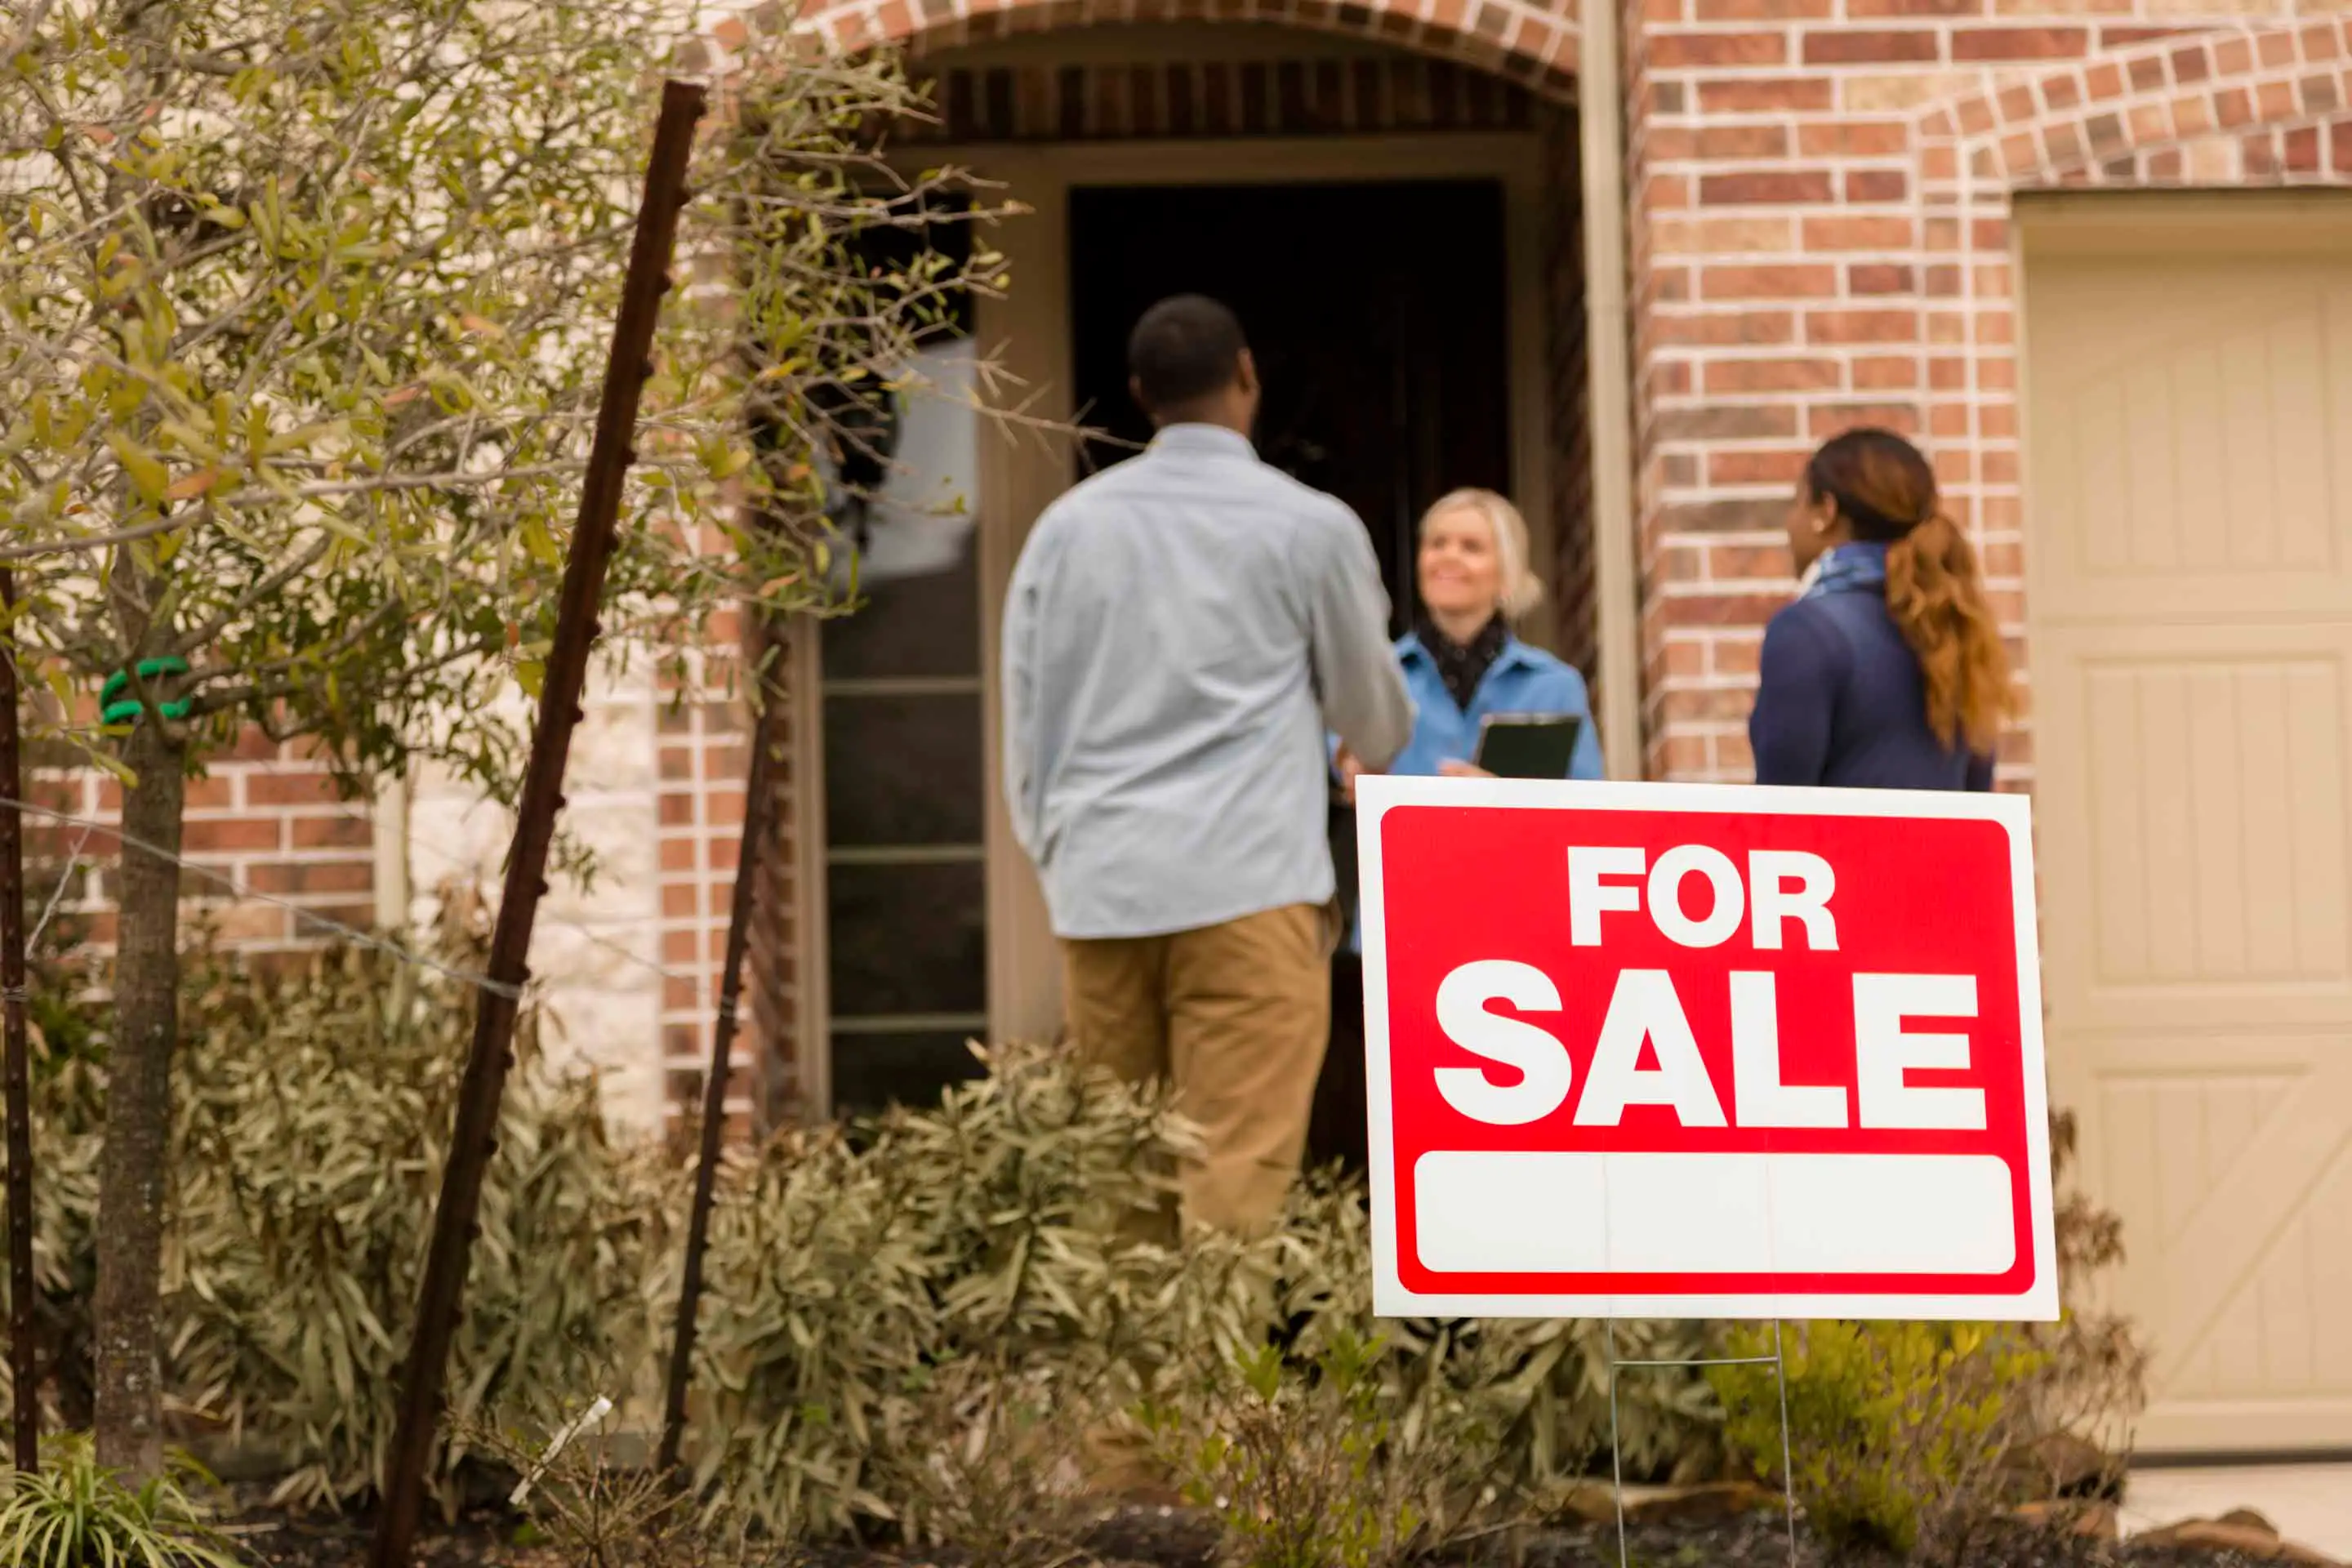 First Home, No Fear: 7 Essential Tips Every New Home Buyer Must Know